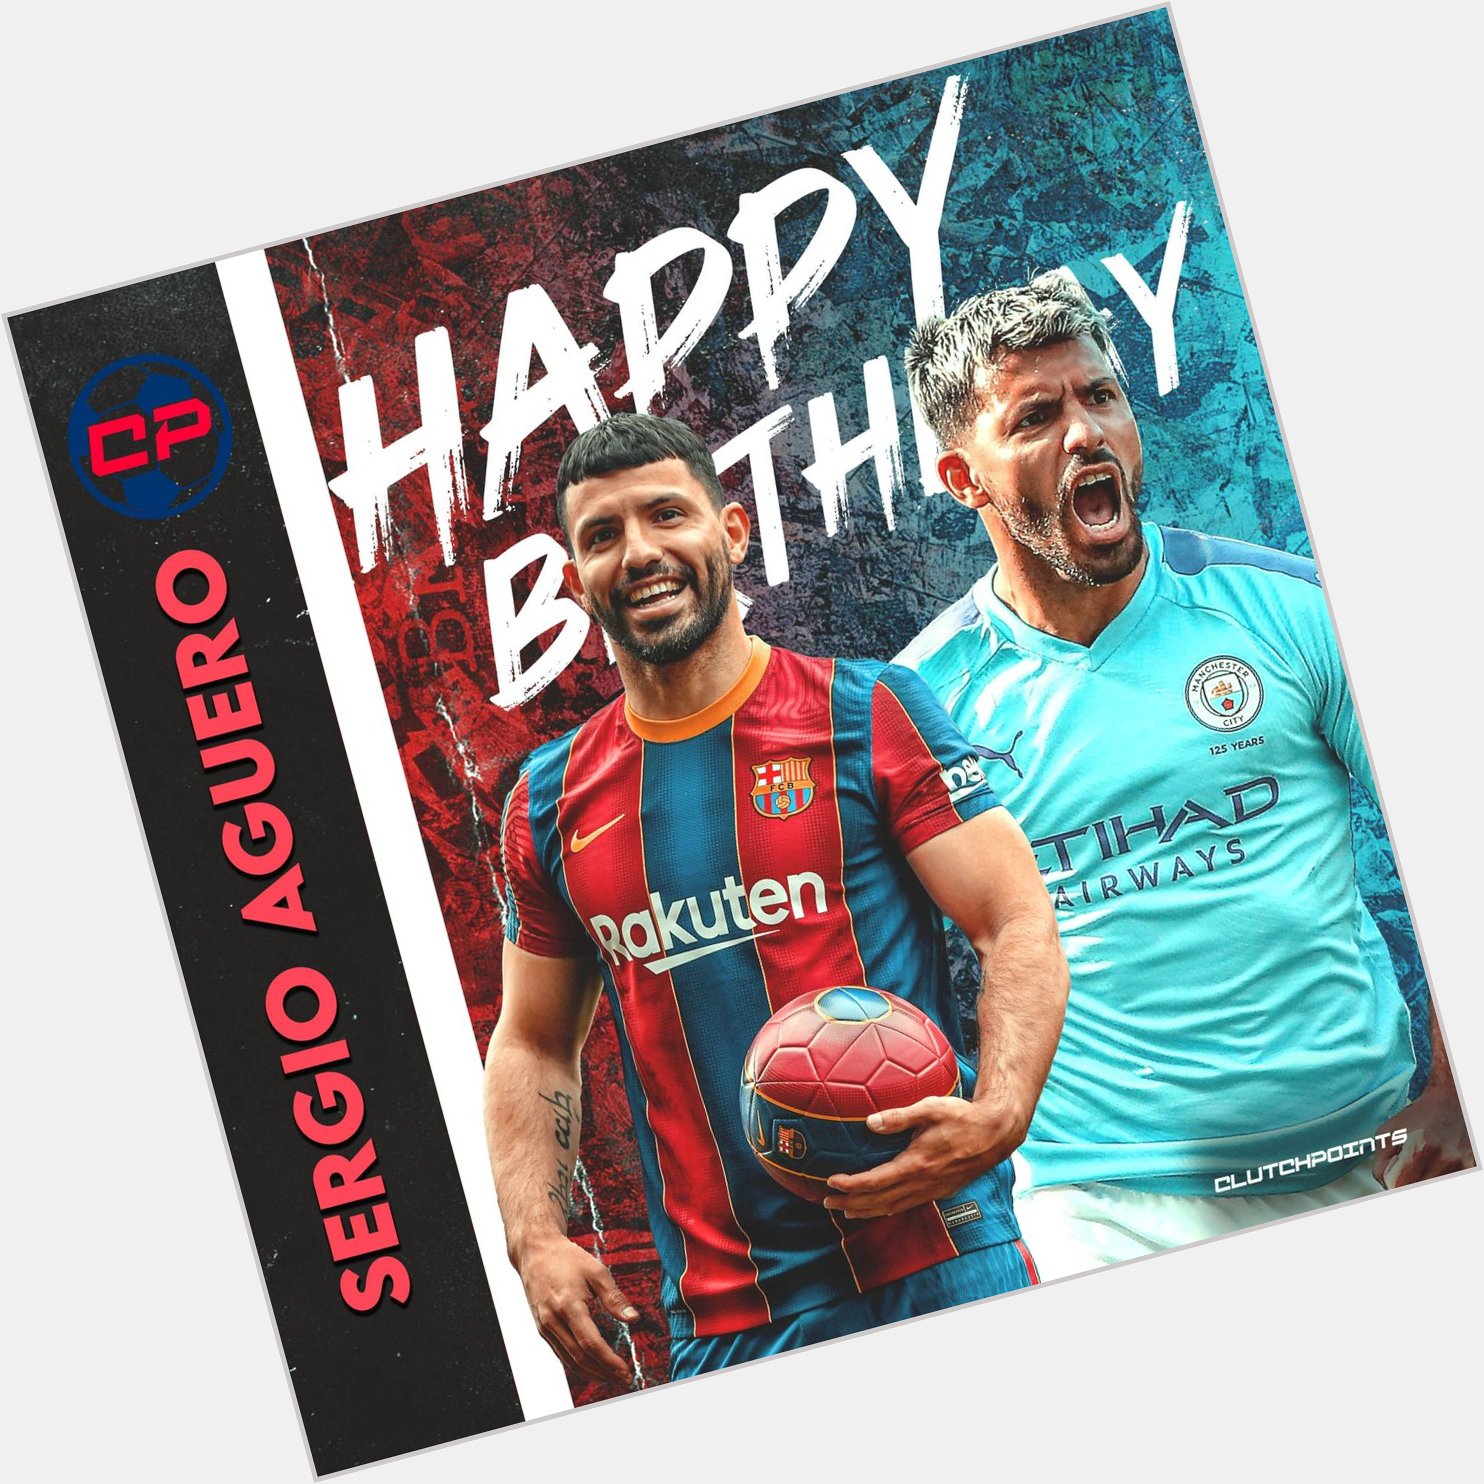 Join us in greeting the Manchester City legend, Sergio Aguero a happy 33rd birthday! 